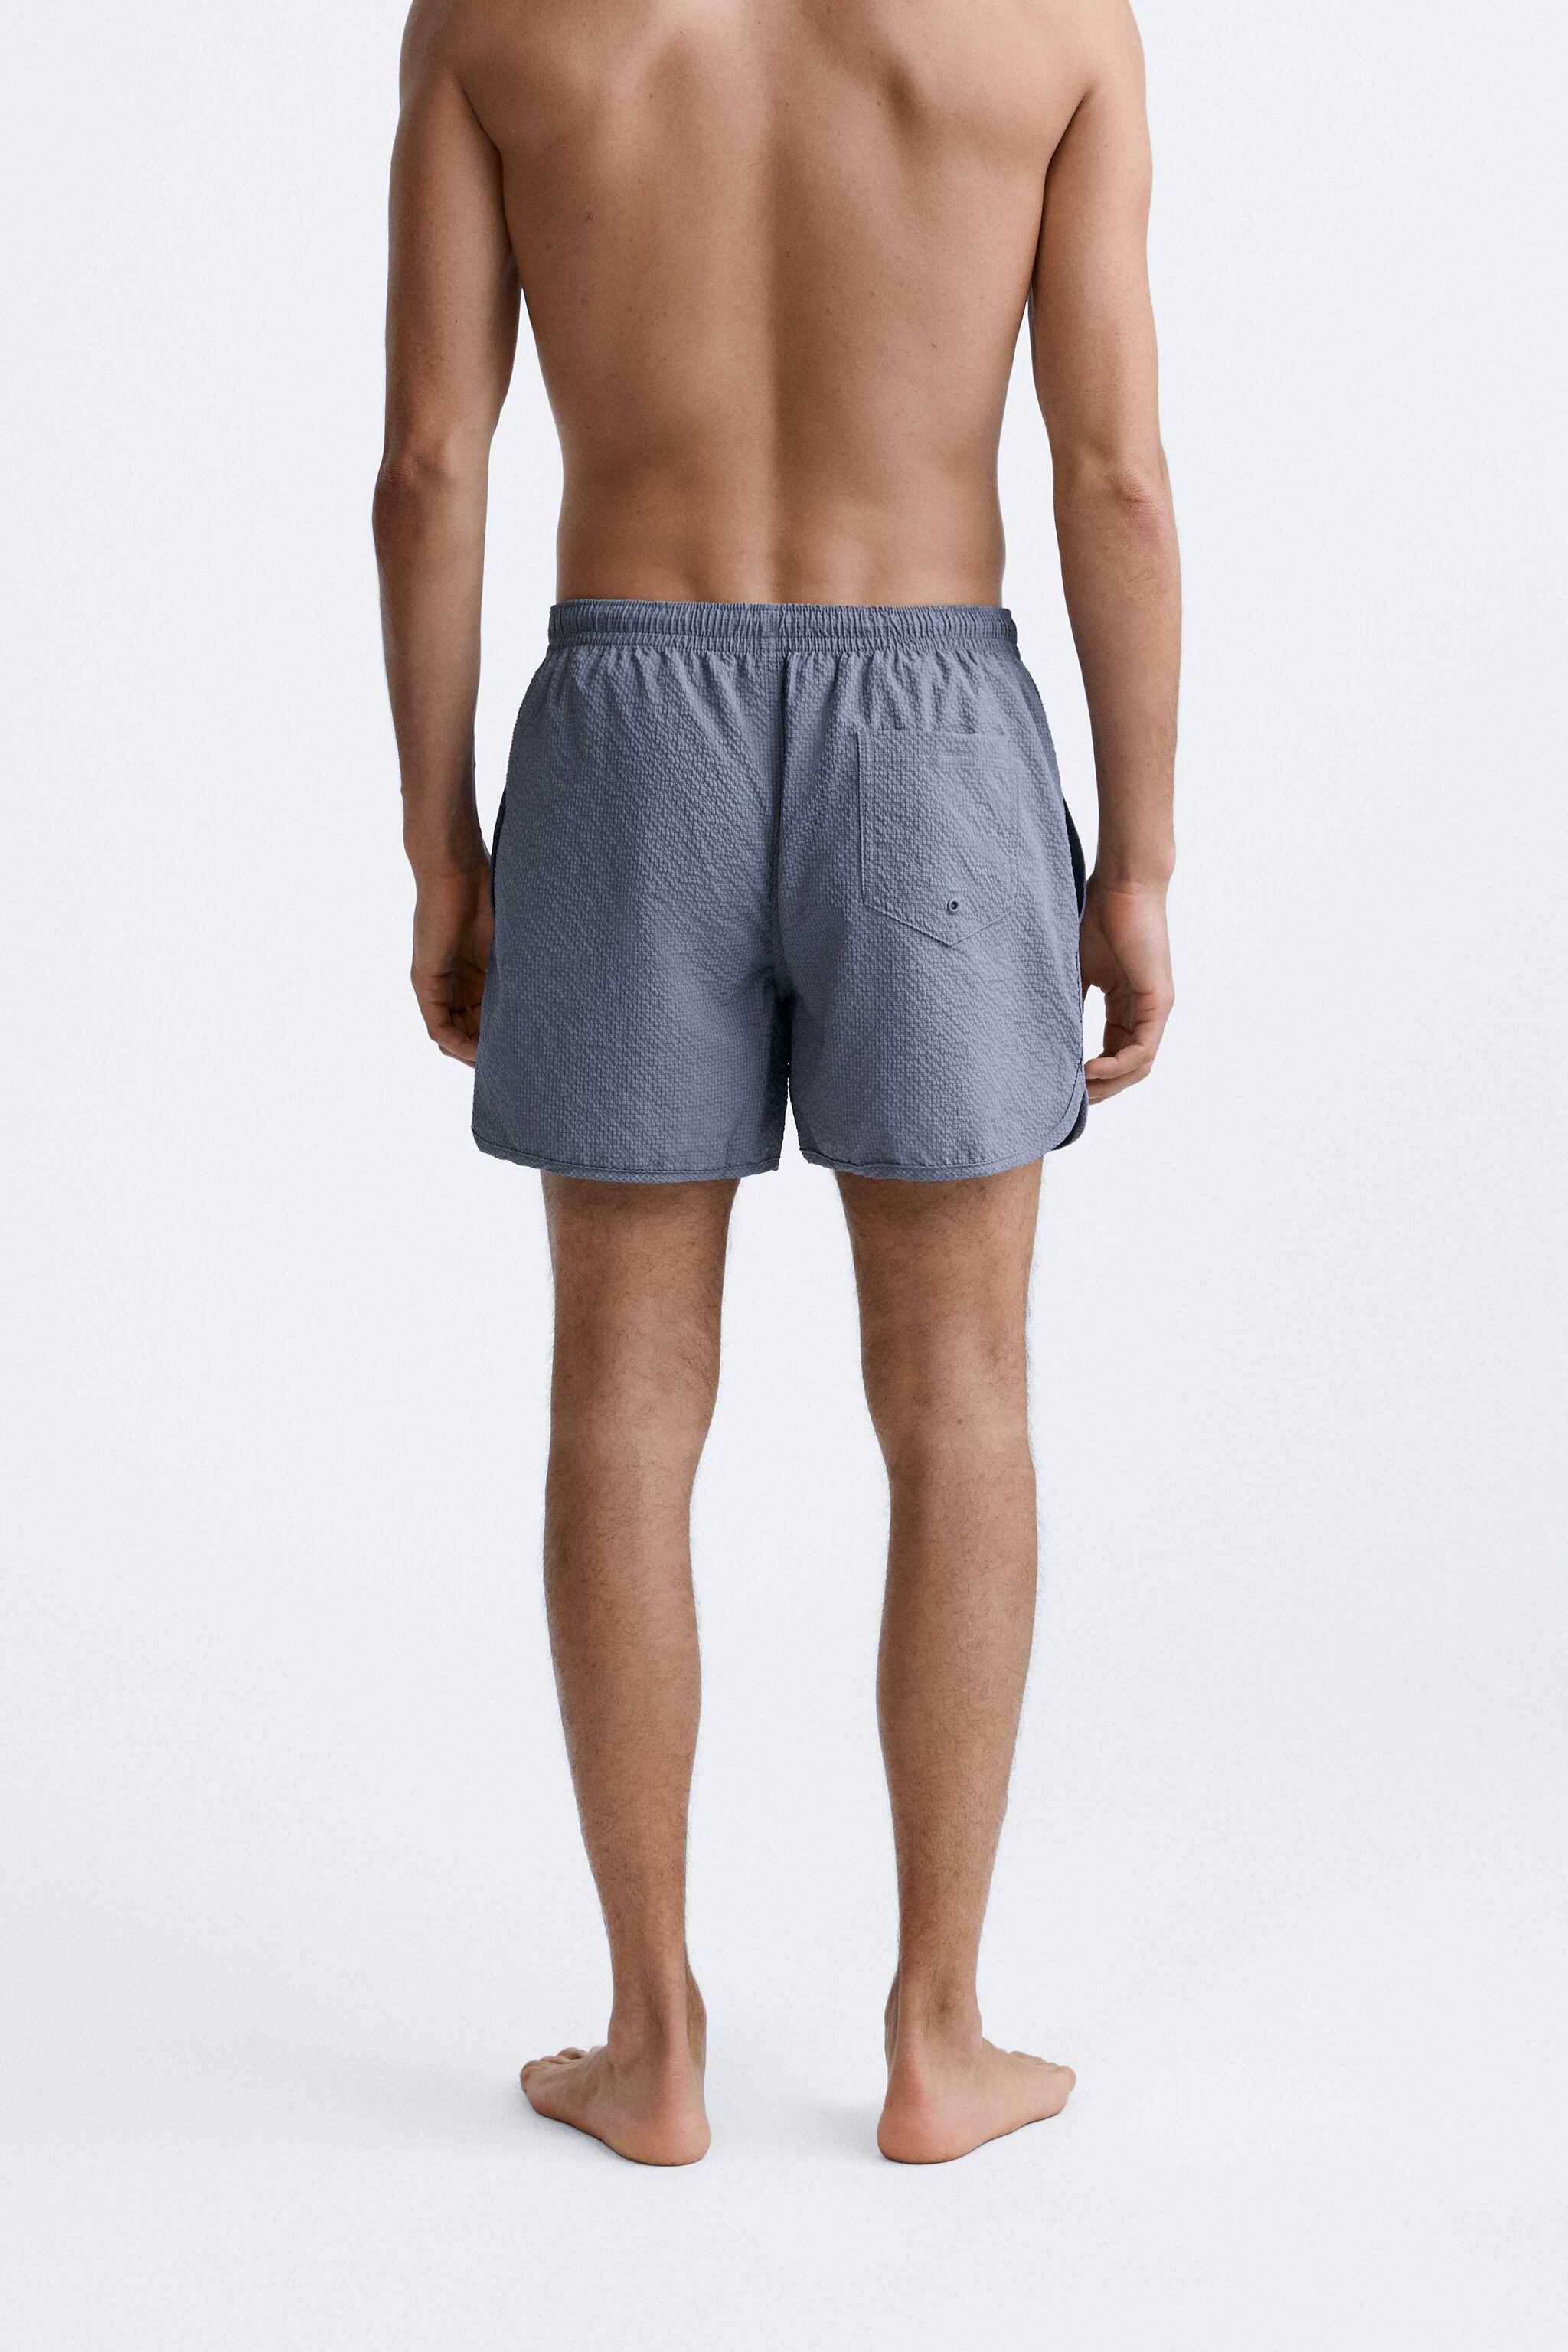 SQUARE TEXTURED SWIMMING TRUNKS